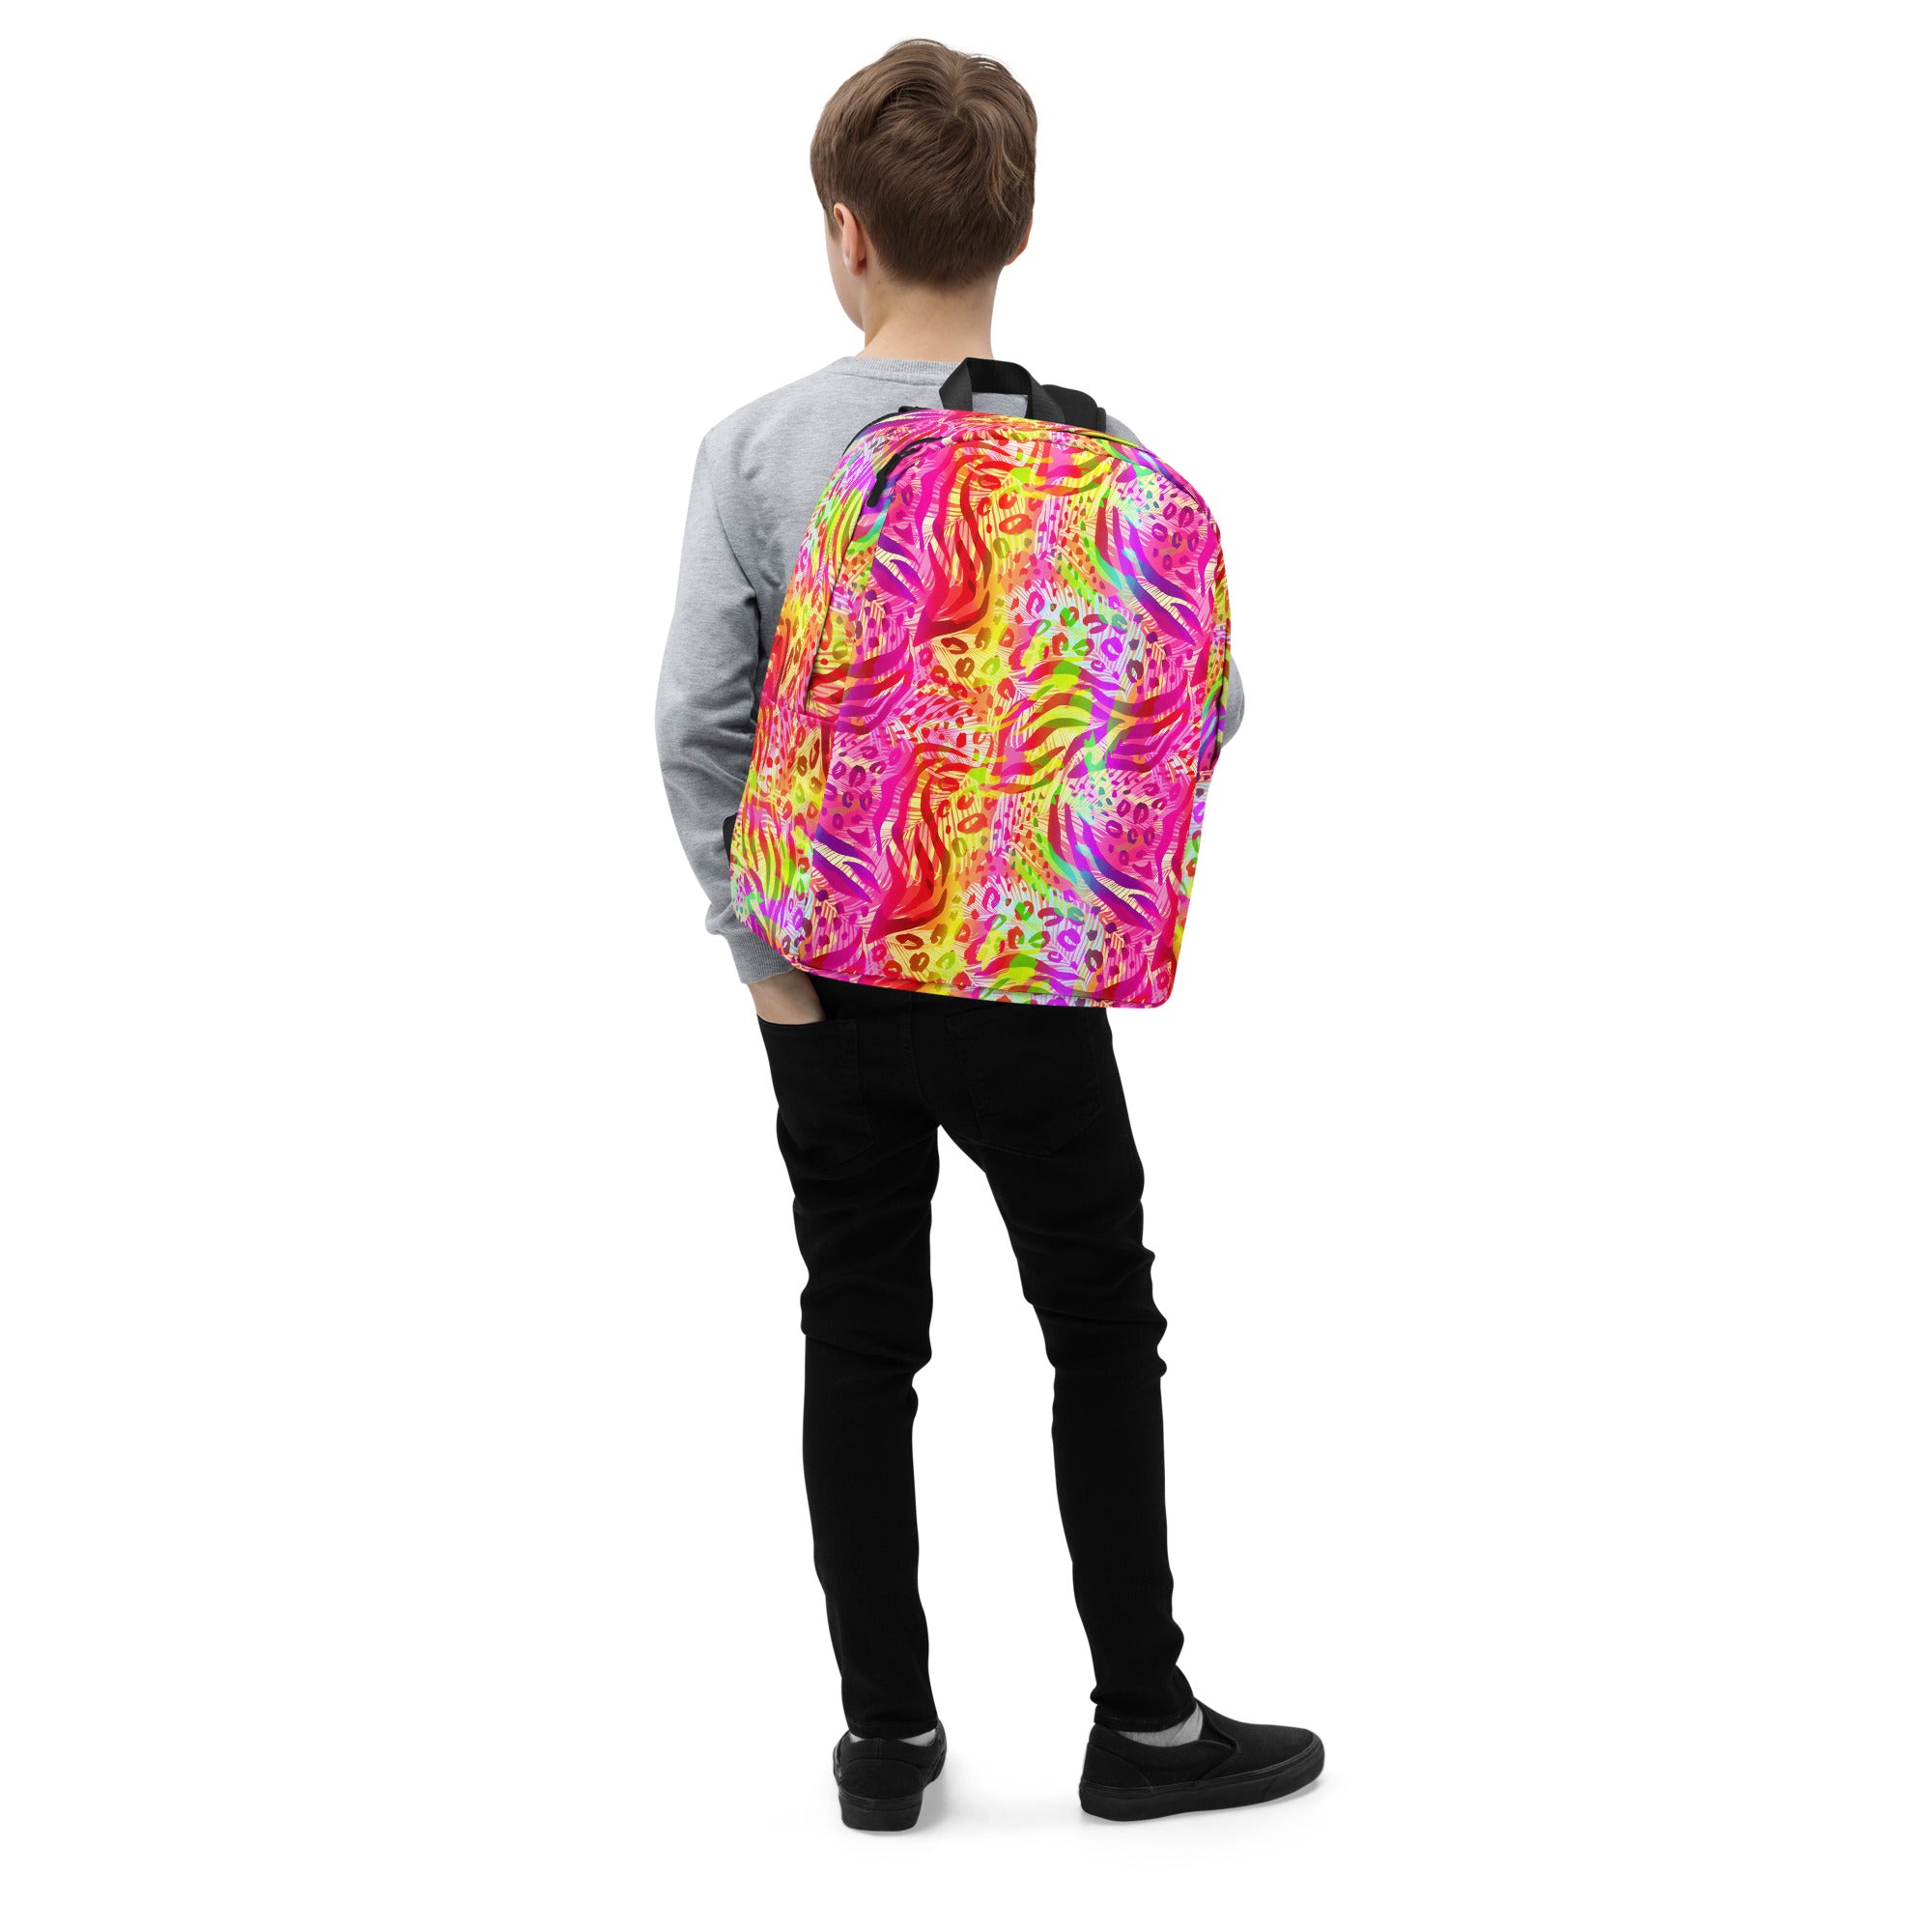 Minimalist Backpack- Animal print summer Yellow,Red with Pink